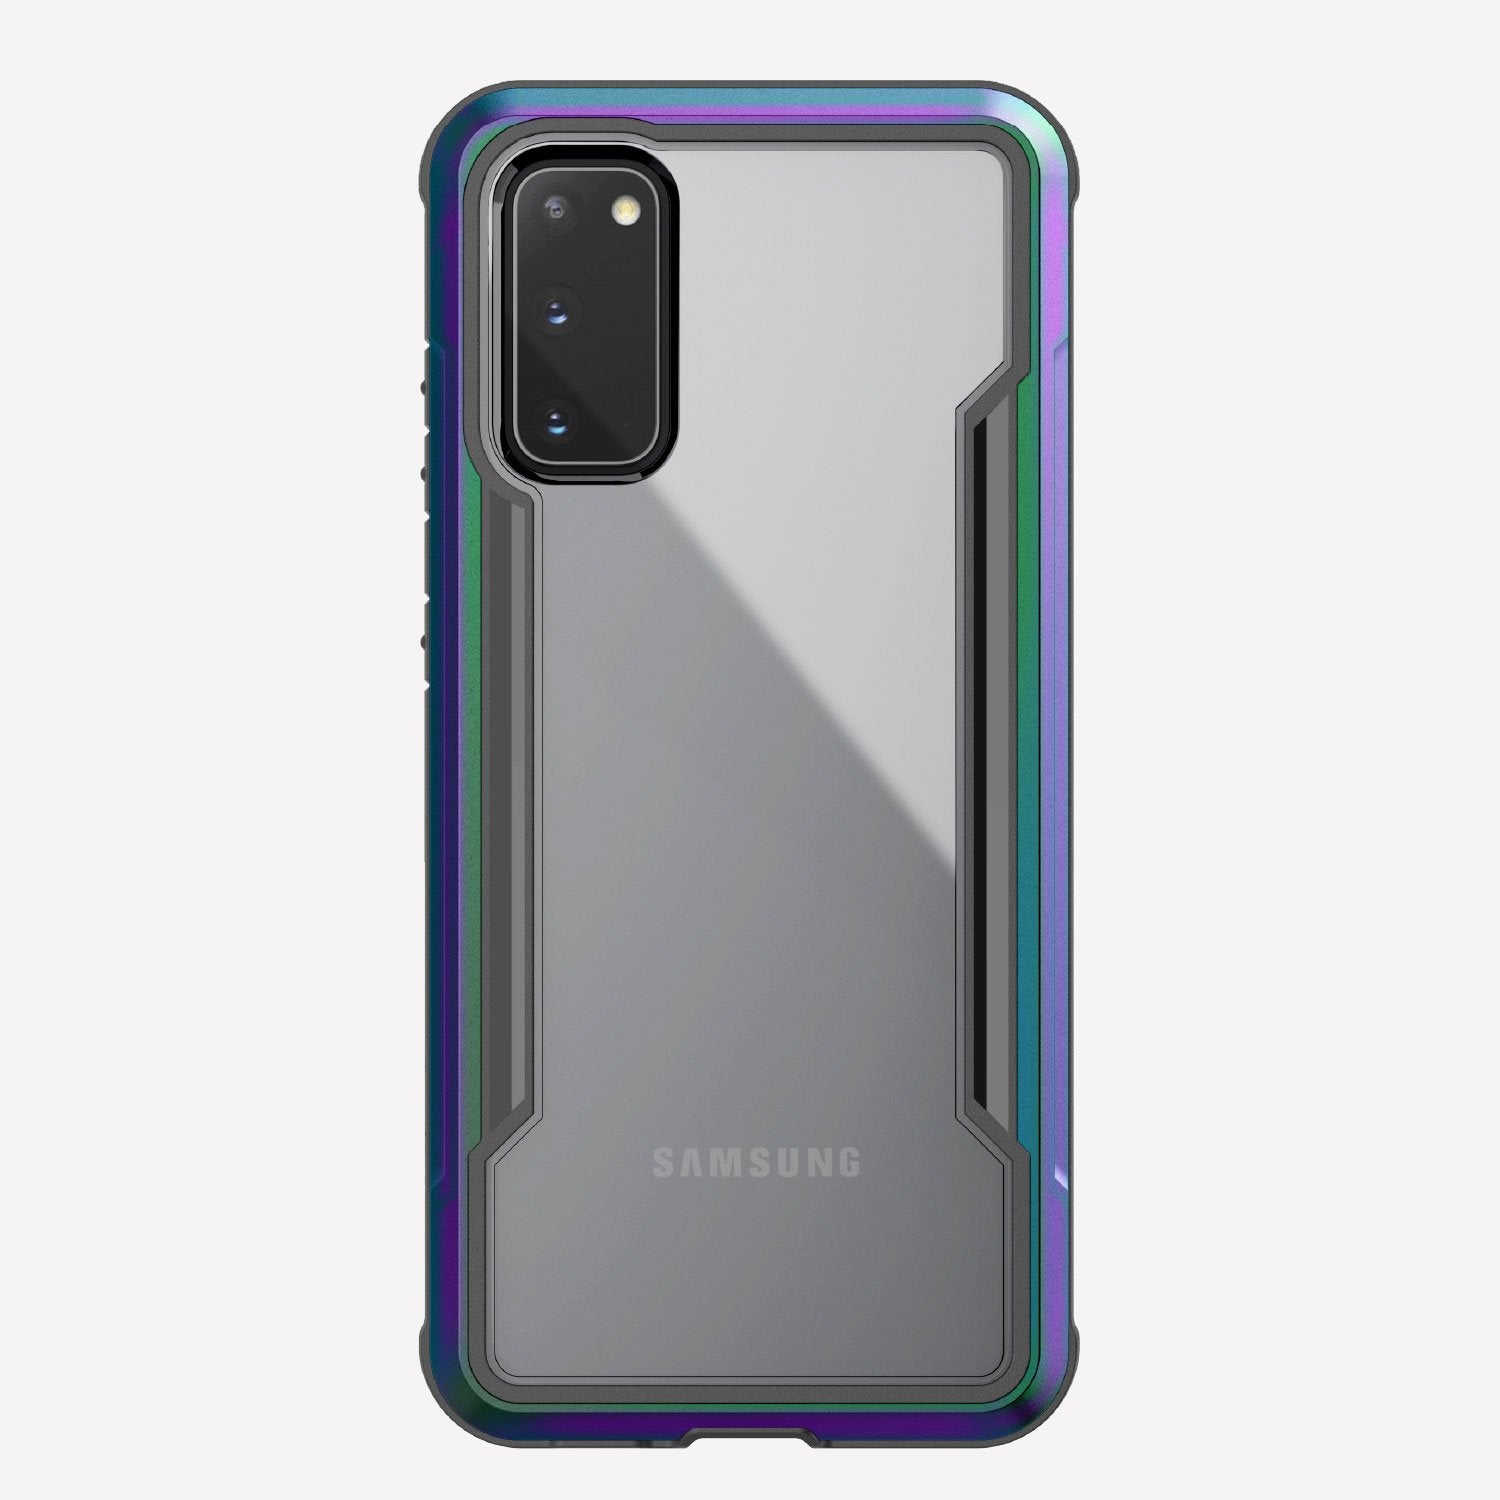 Defense shield iridescent with Galaxy S20 in it showing the back view to show the iridescent color back panel and that it's transparent